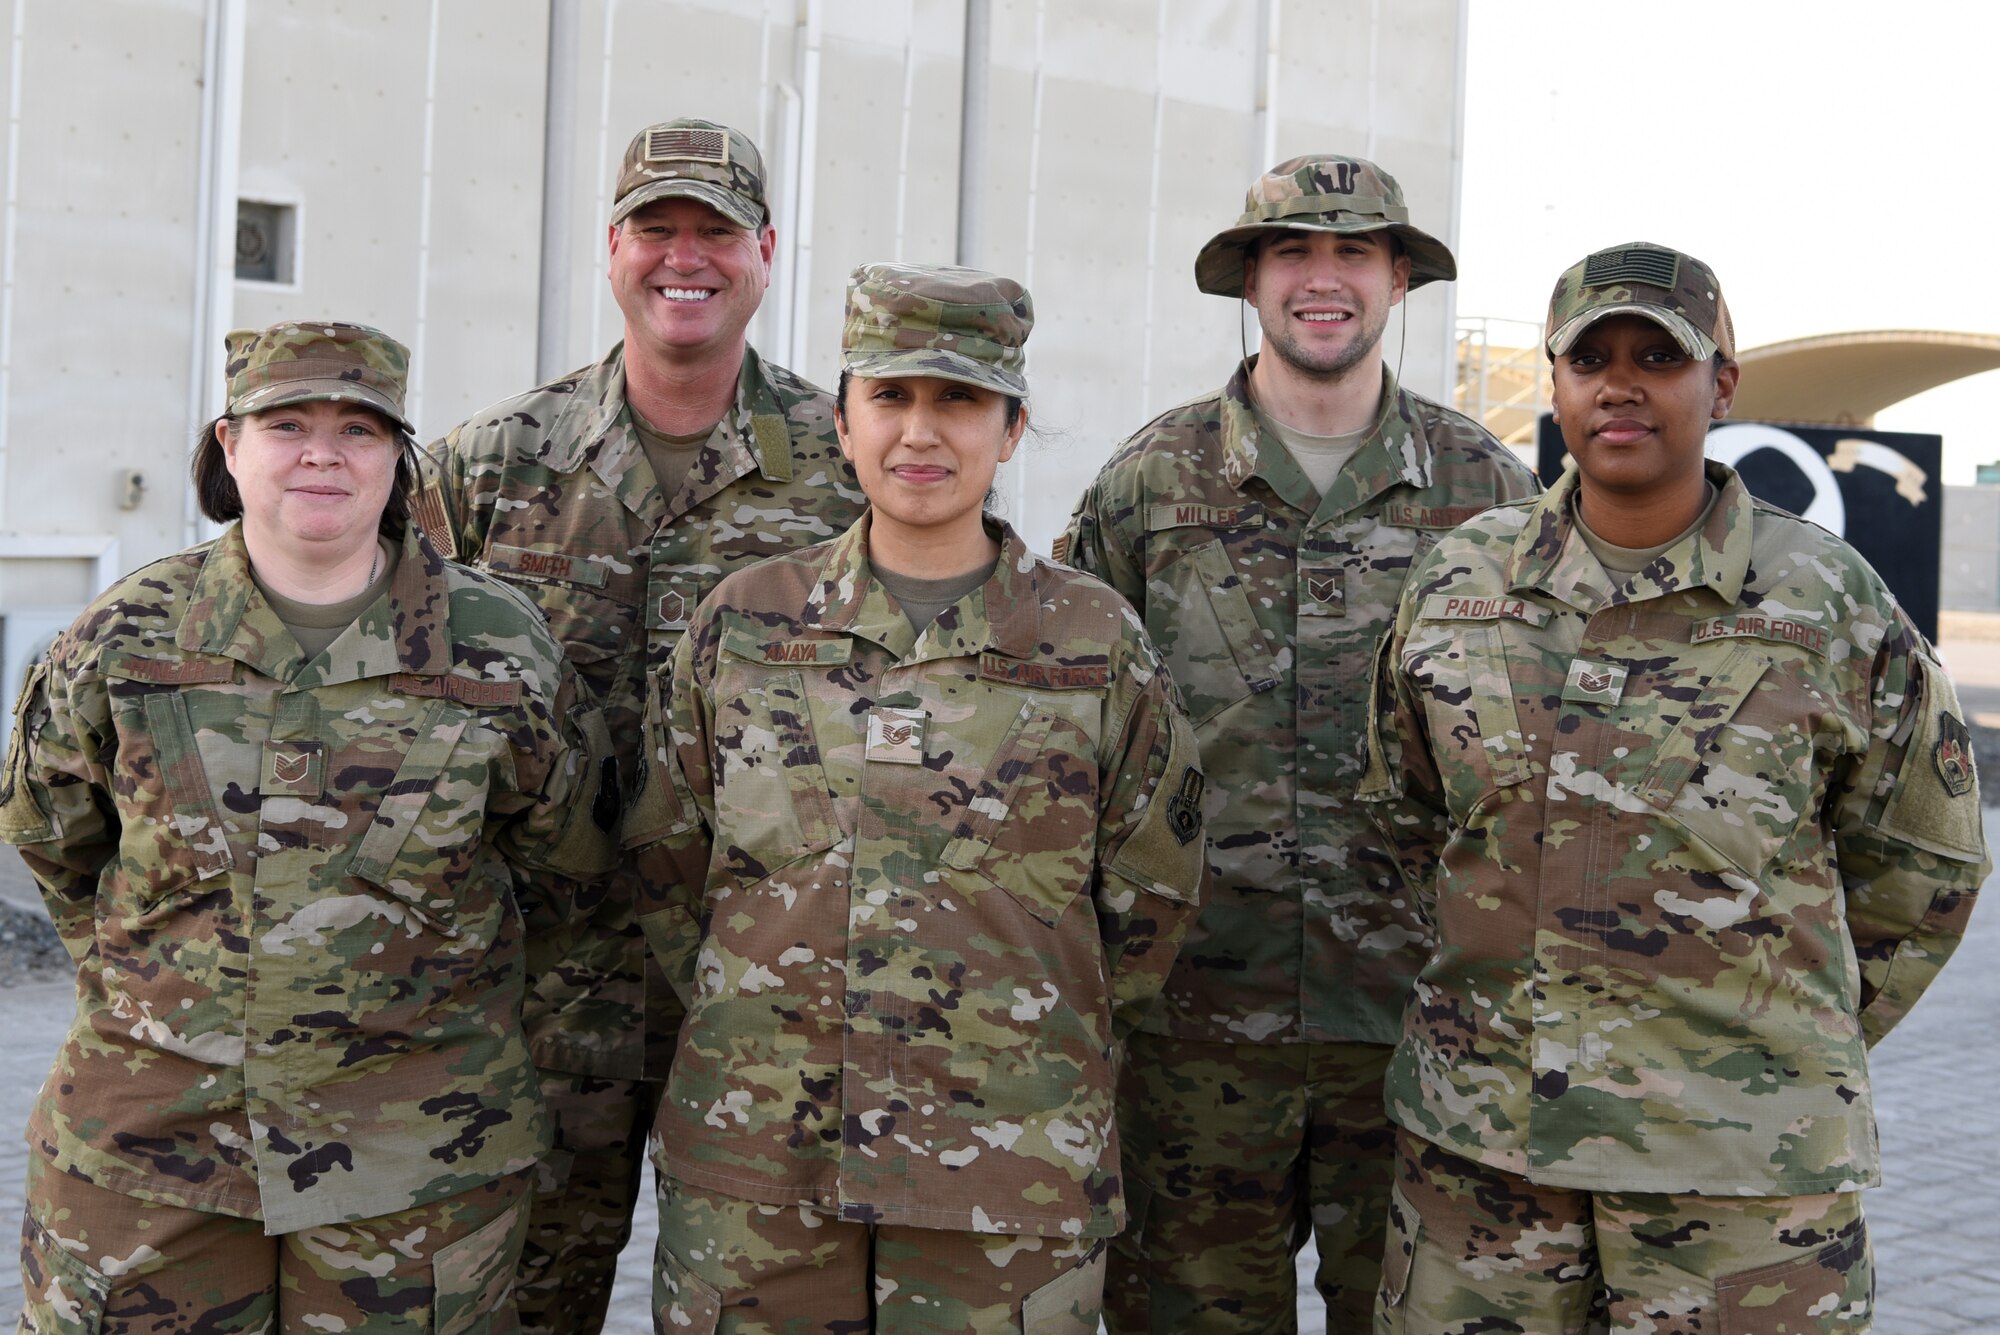 380th Air Expeditionary Wing Command Post personnel pose for a group photo April 25, 2019, Al Dhafra Air Base, United Arab Emirates.